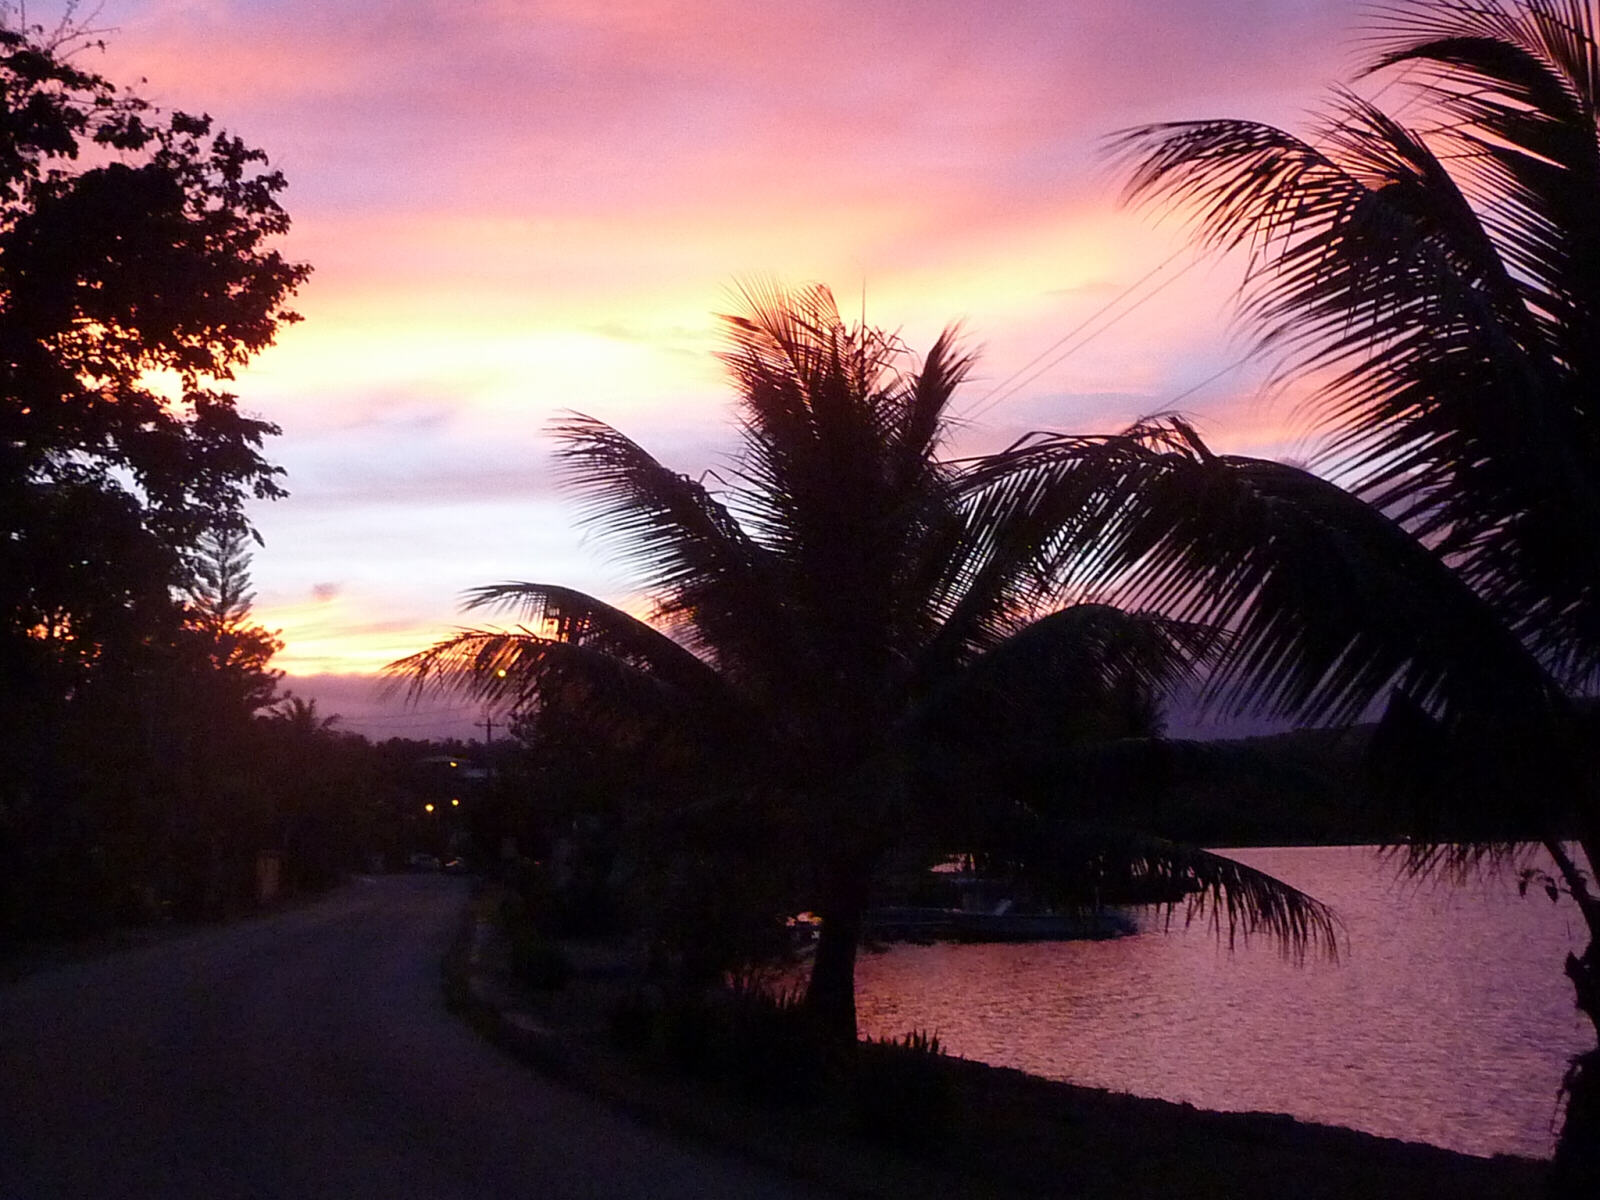 A totally tropical sunset in Yap, Micronesia